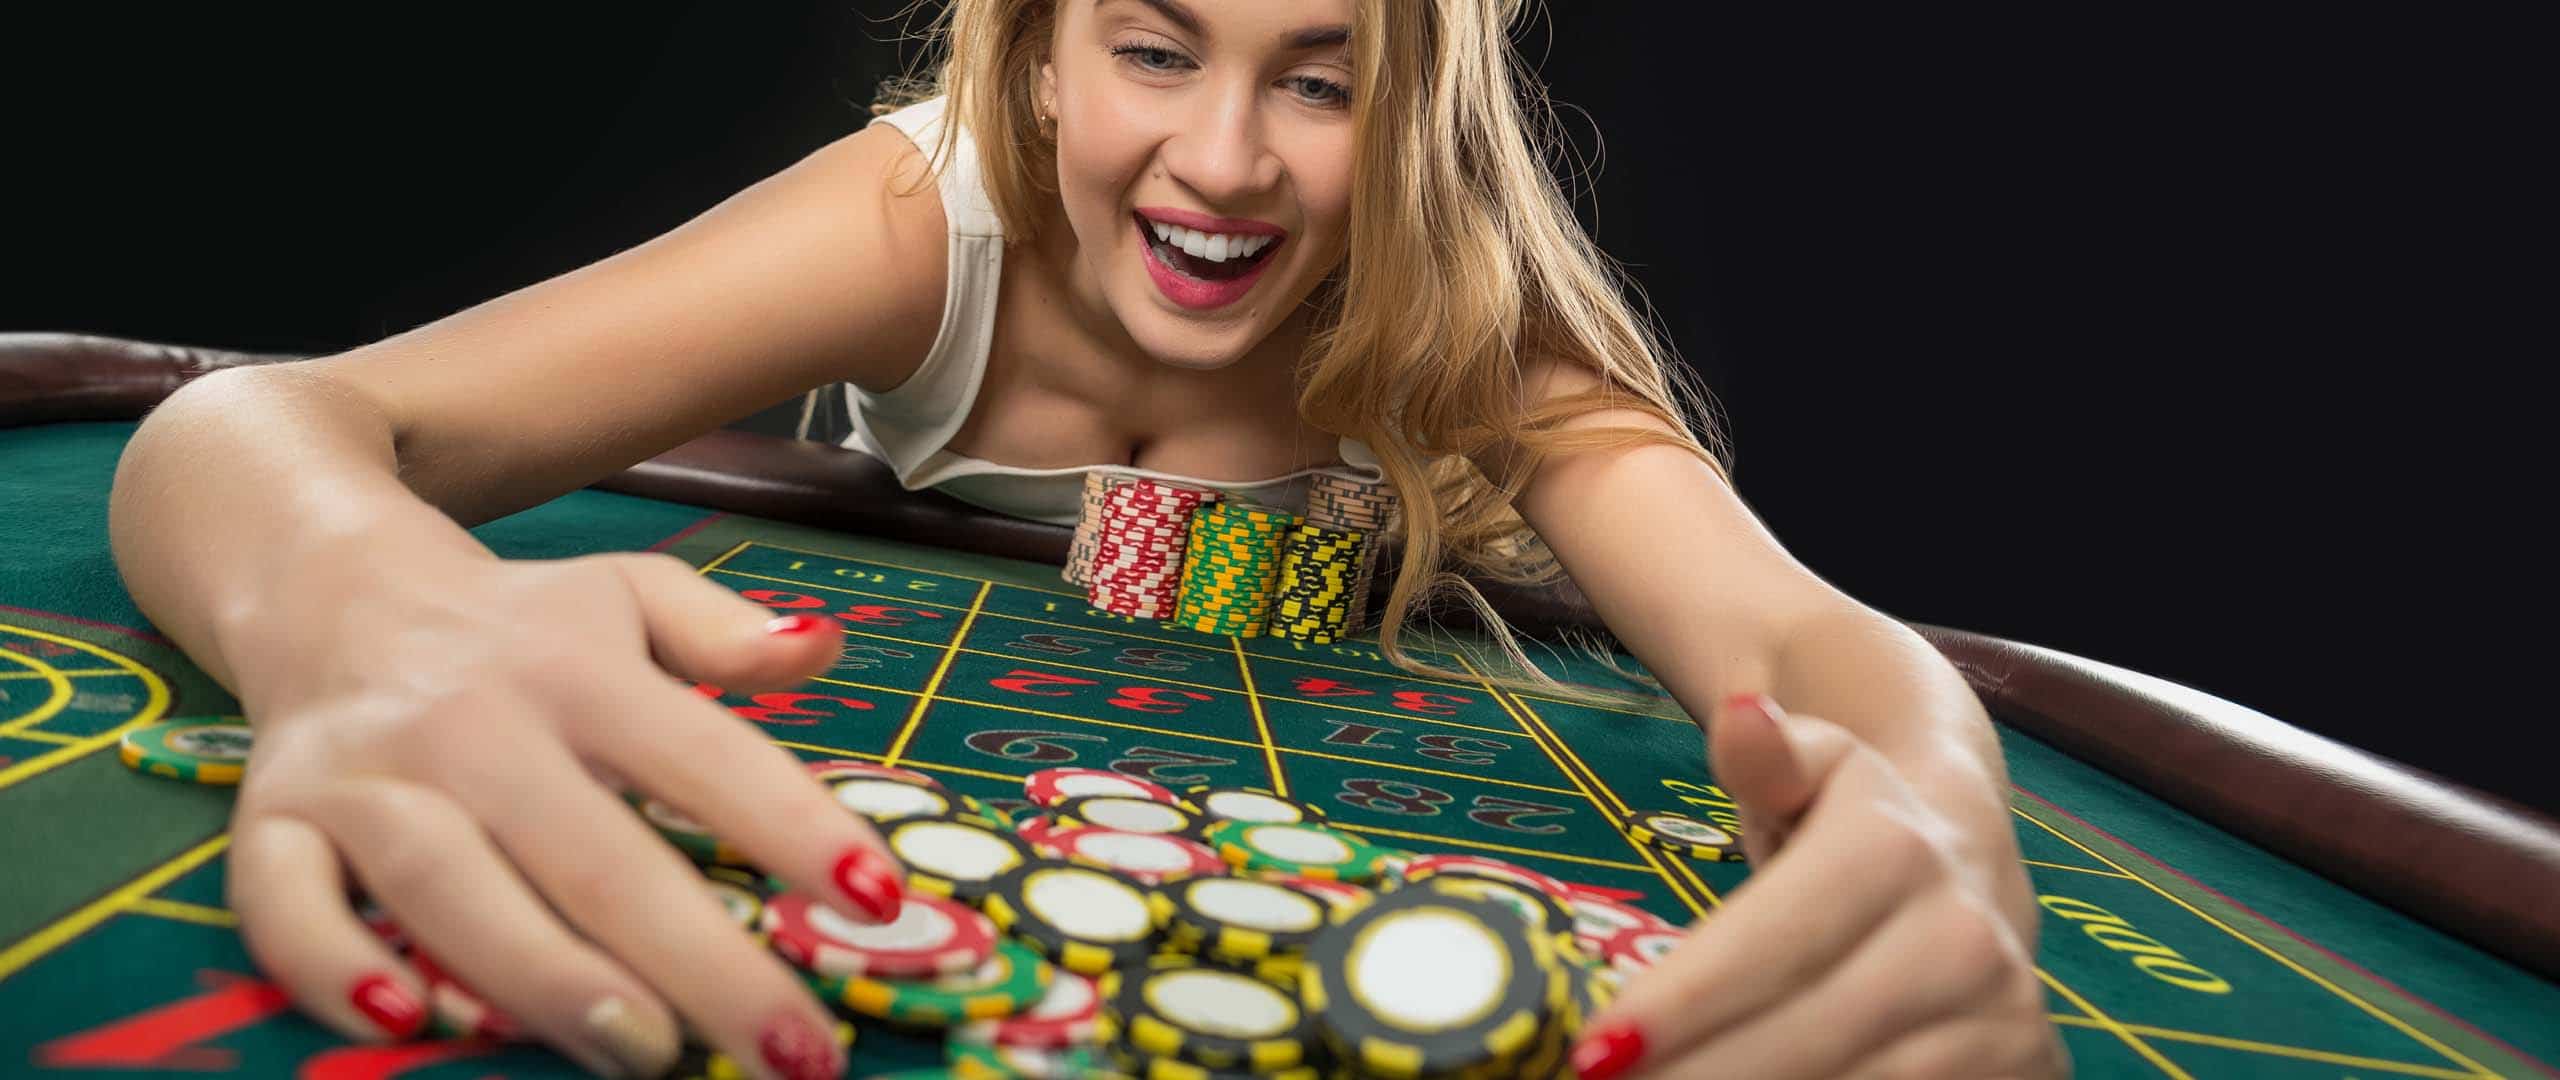 Biggest Wins On Roulette